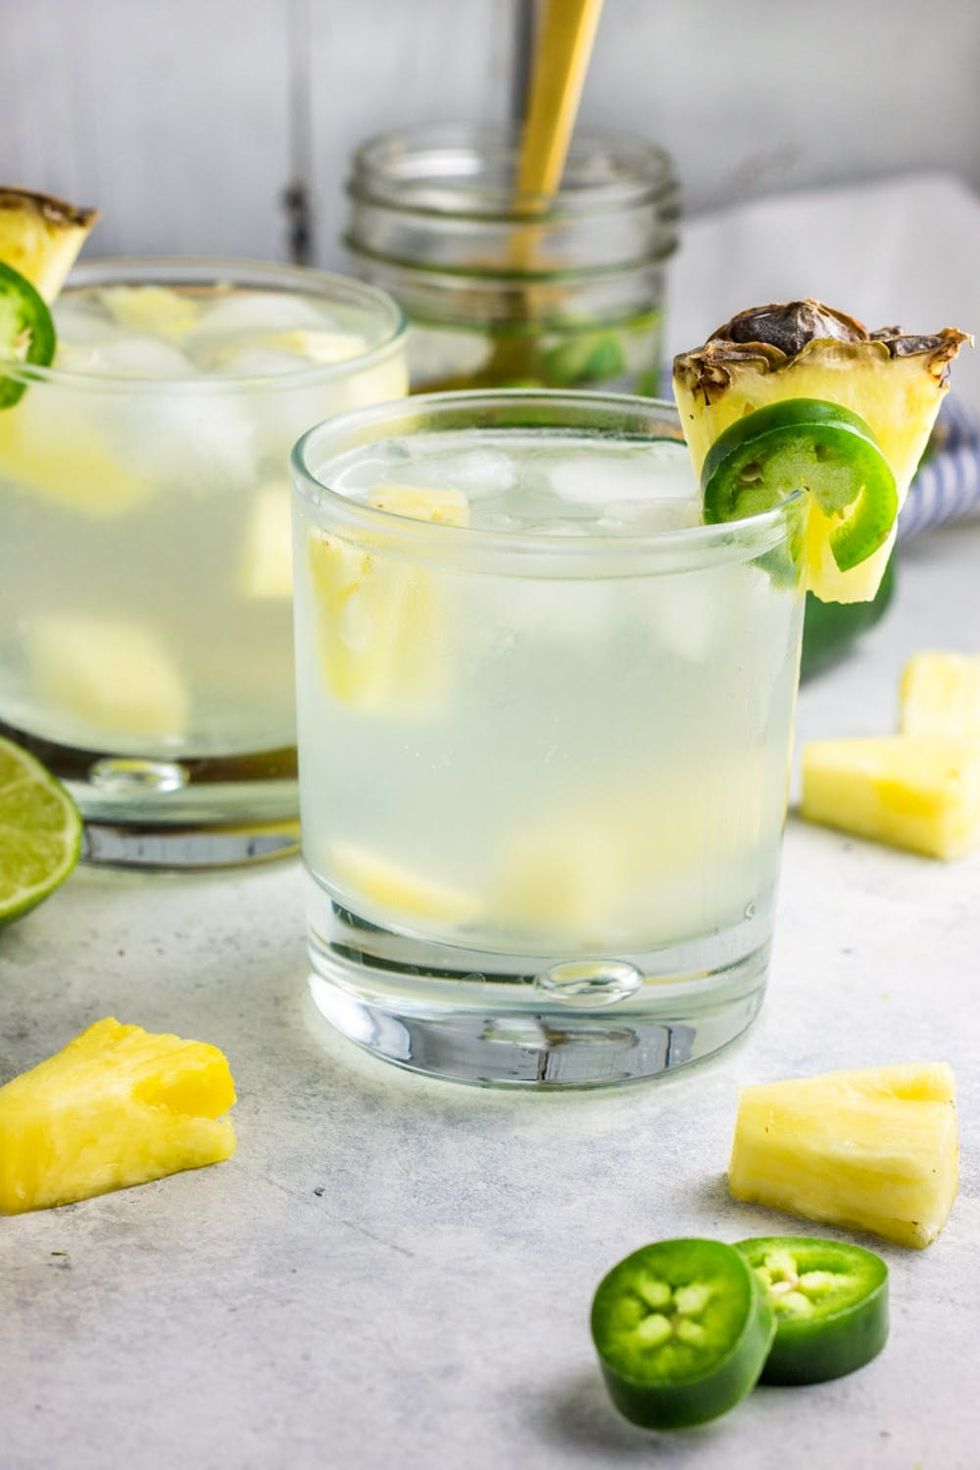 Skinny Pineapple and Jalapeno Infused Vodka Cocktail